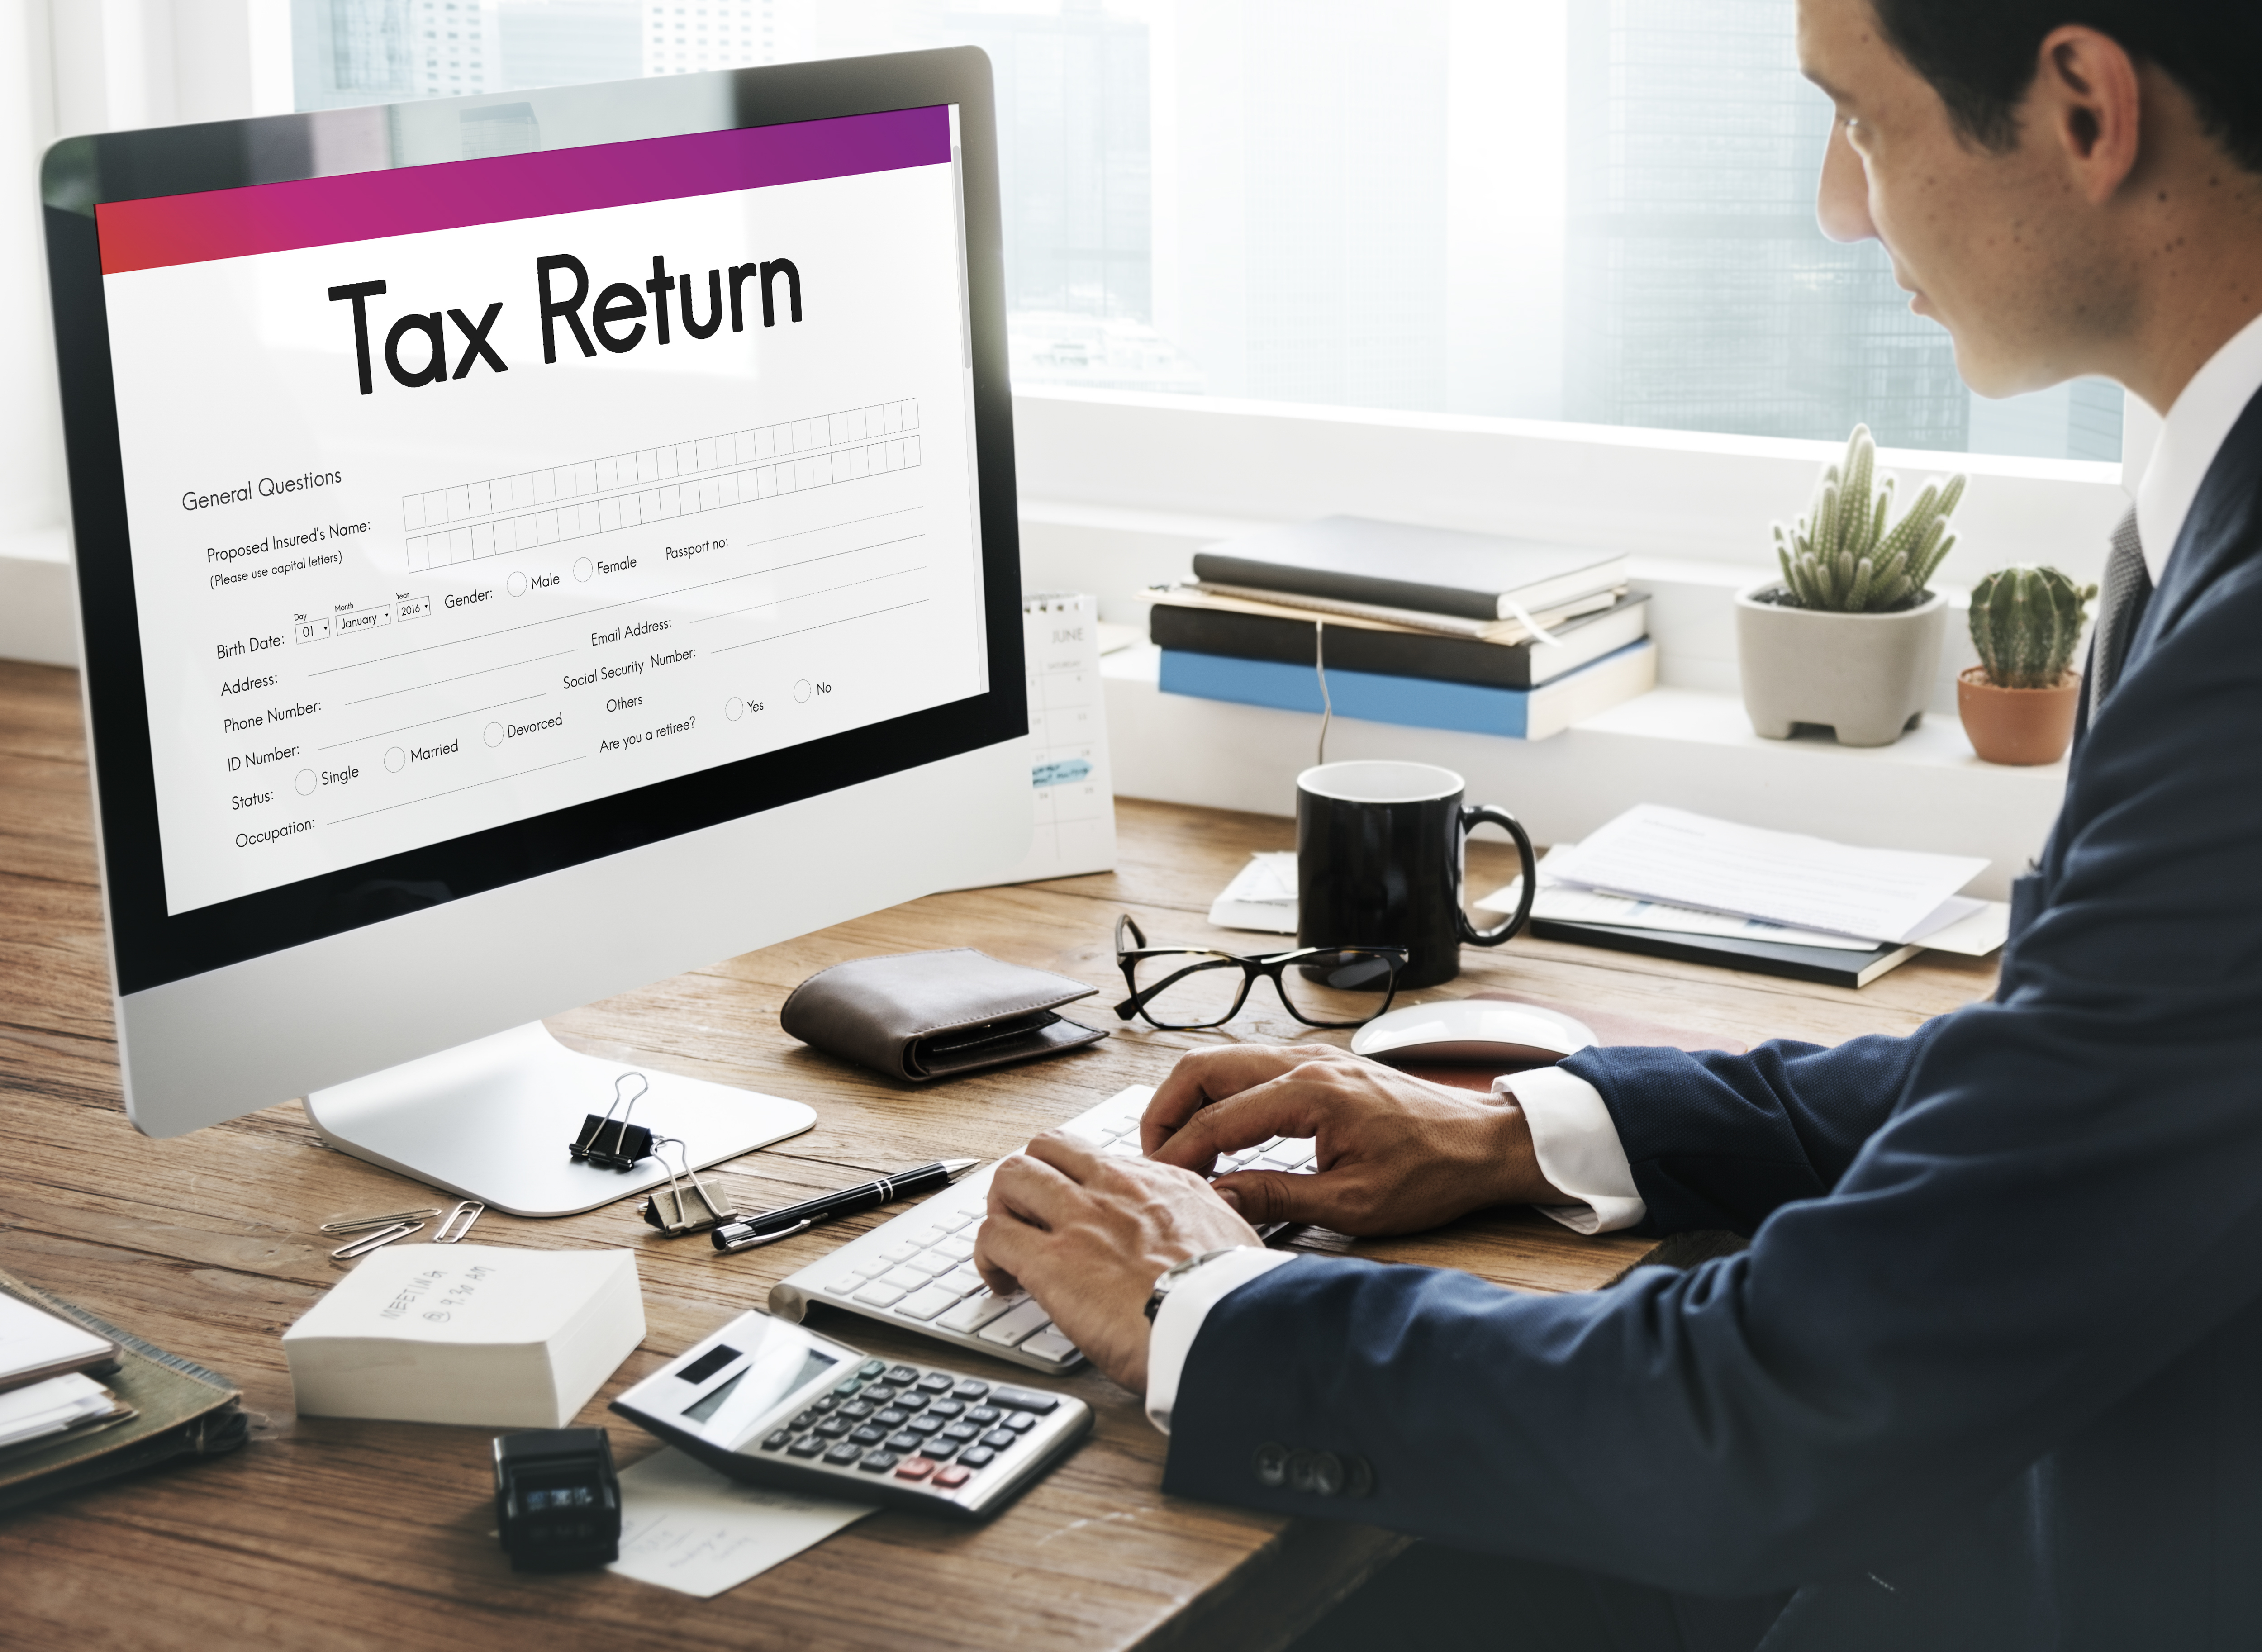 Tax Right Software: Streamlining Your Tax Filing Process for 2022 and Beyond